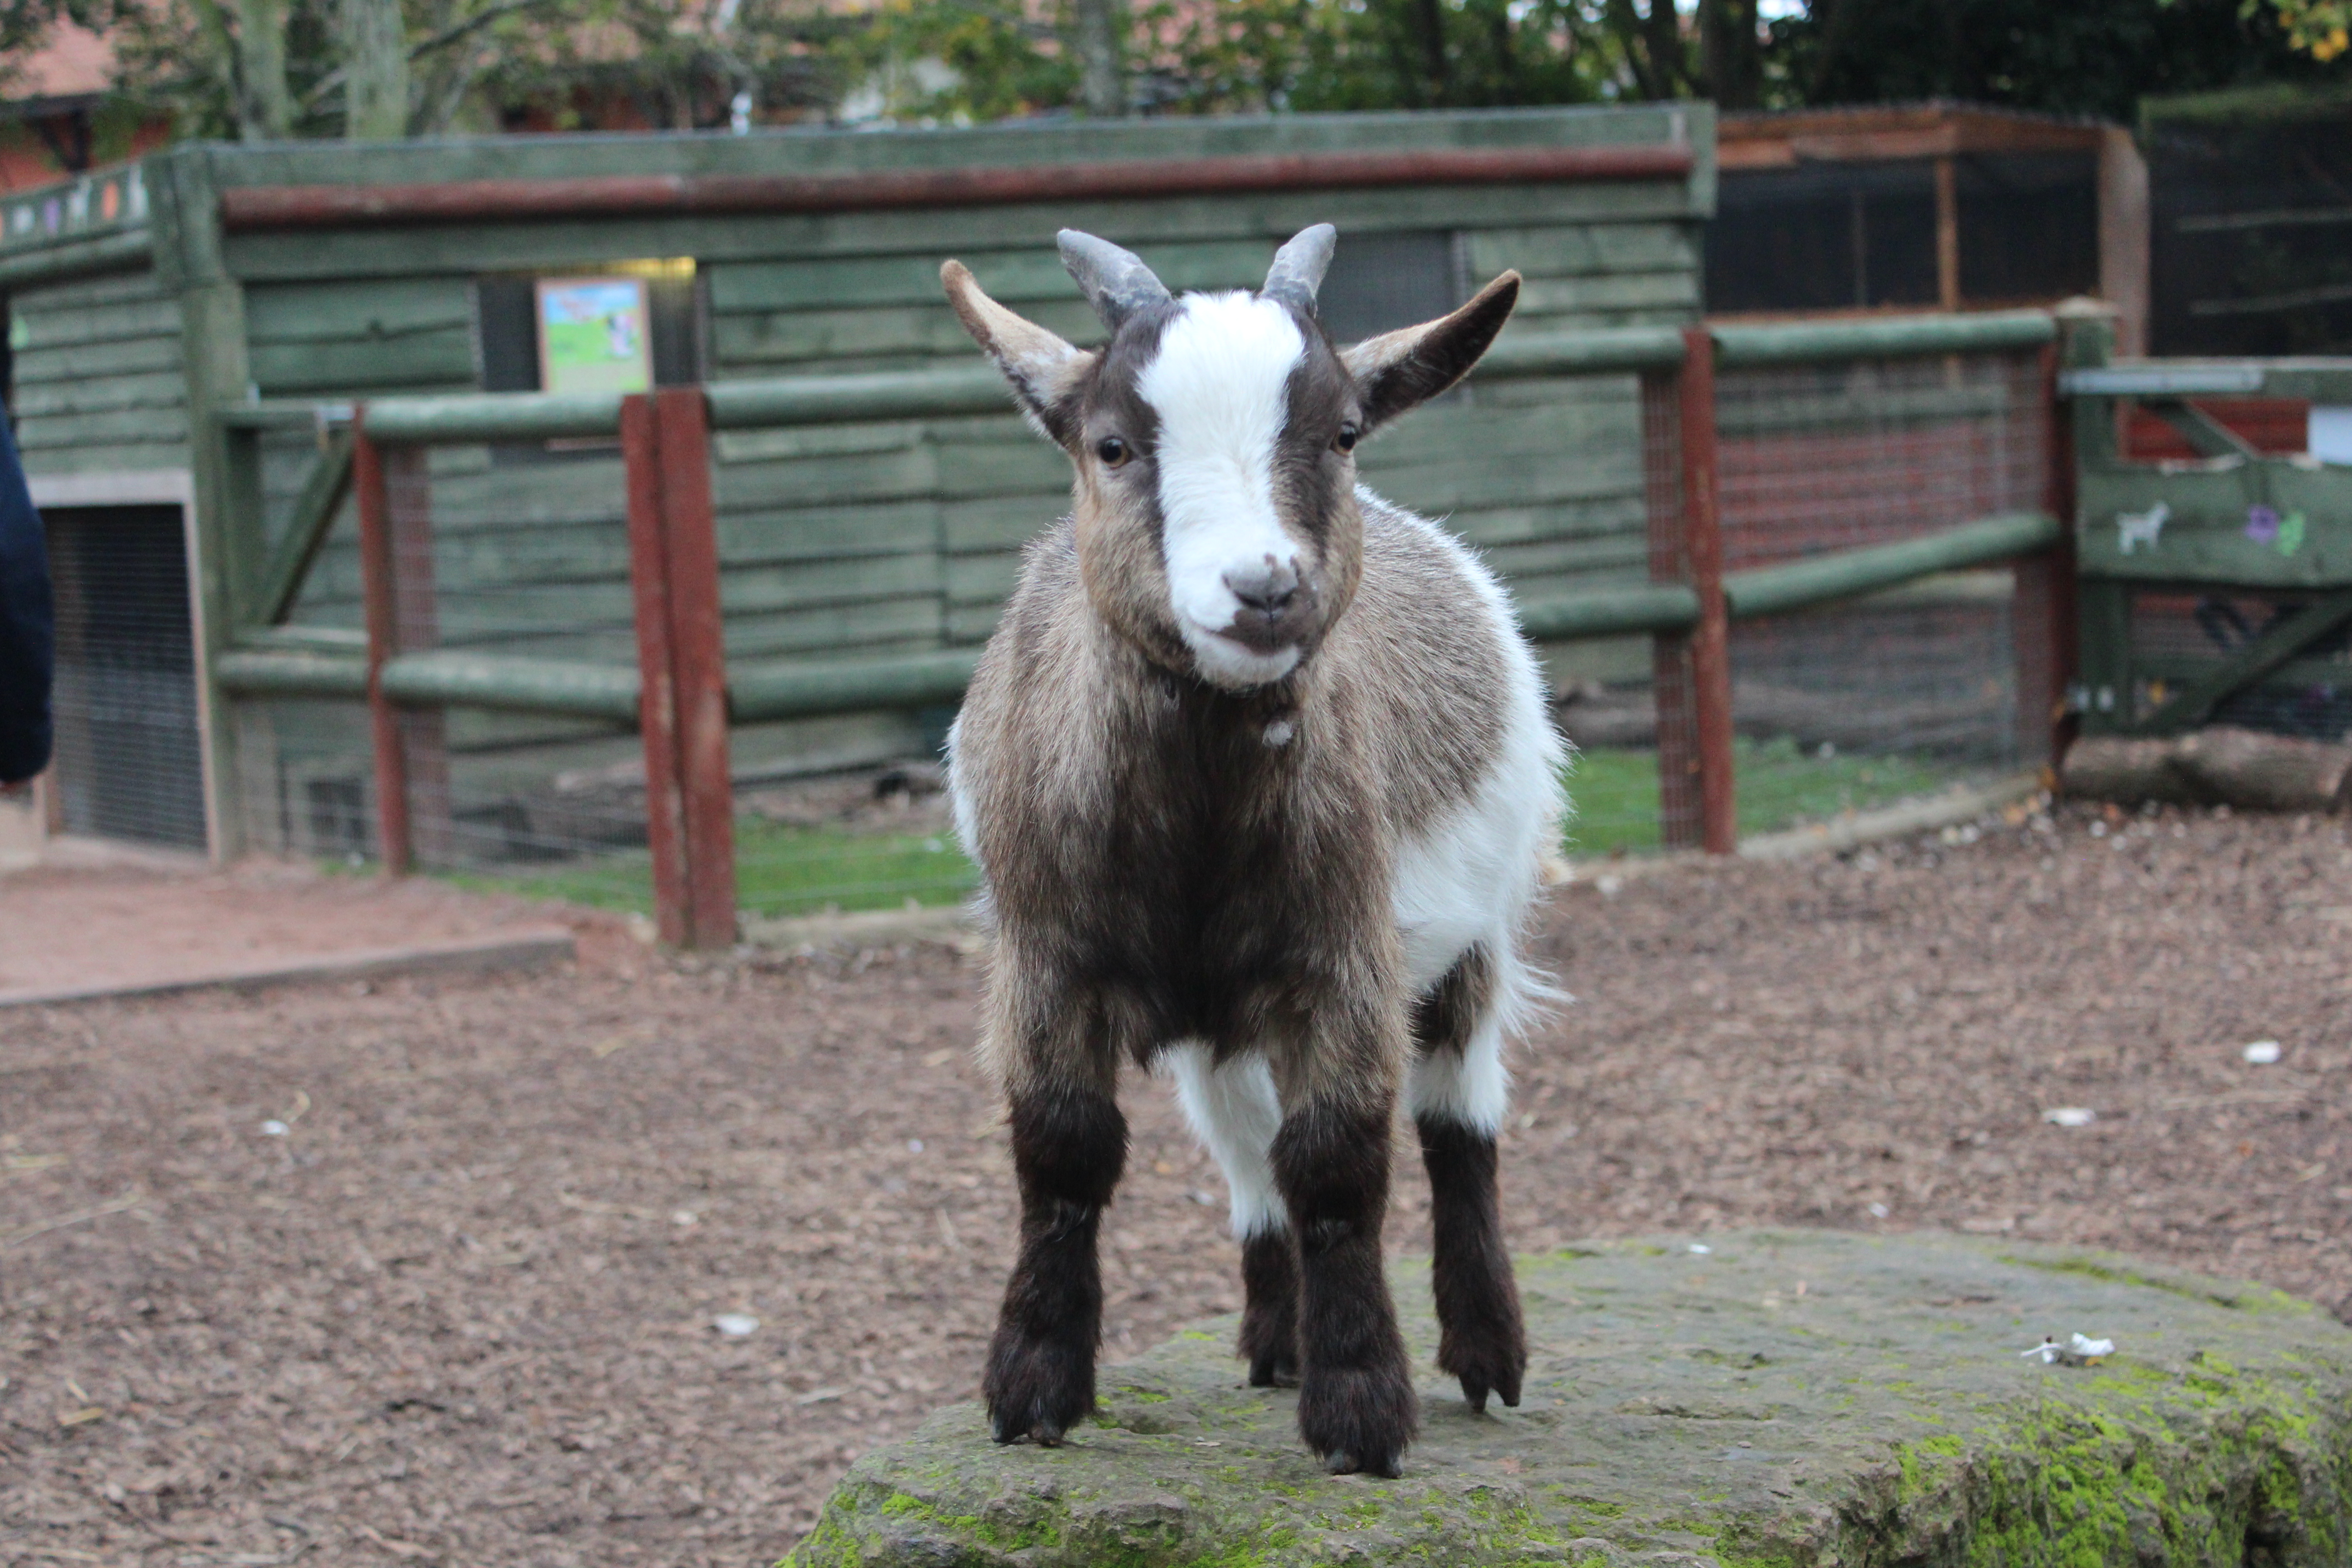 African Pygmy Goats in the Chessington Zoo